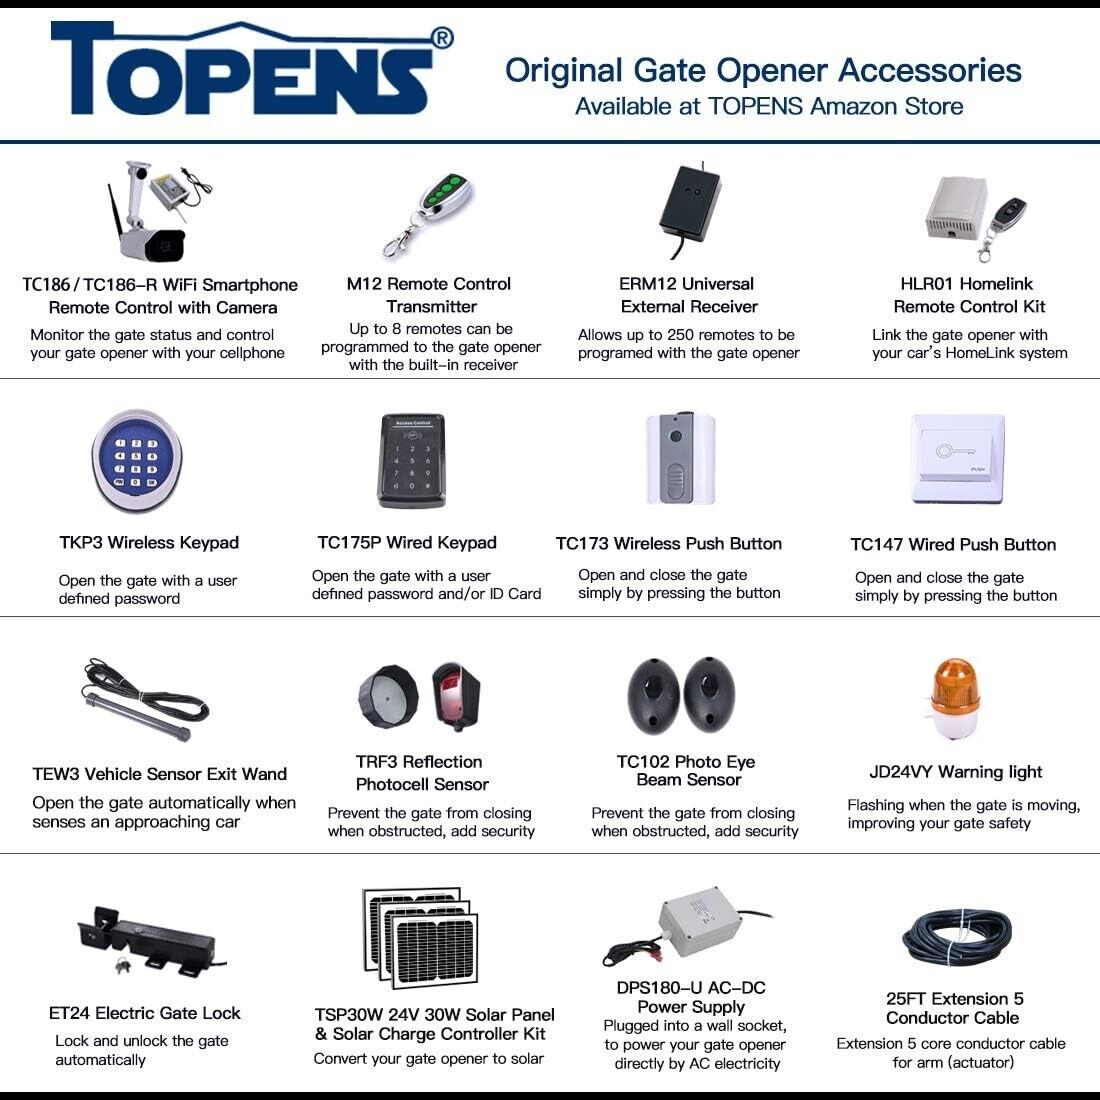 TOPENS A3 Automatic Light Duty Swing Gate Opener